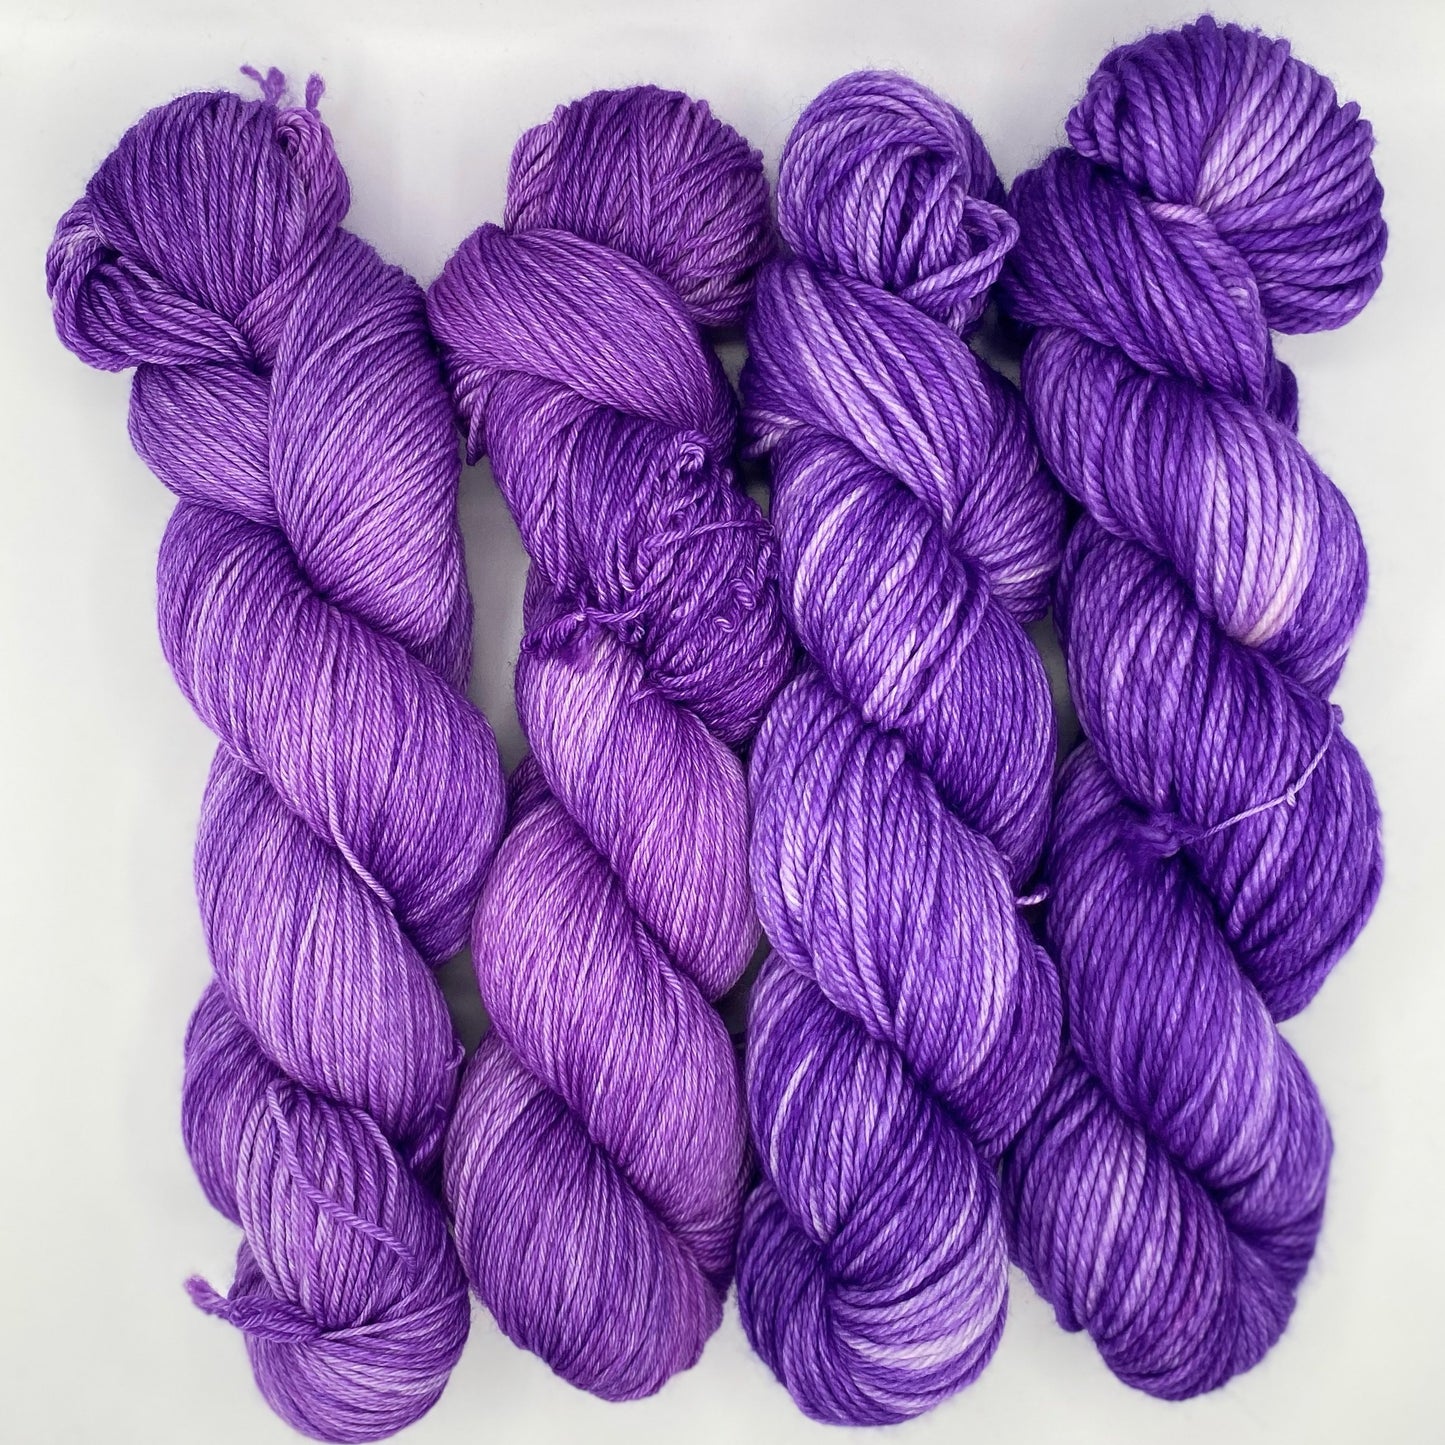 Dyed to Order - Amethyst Queen